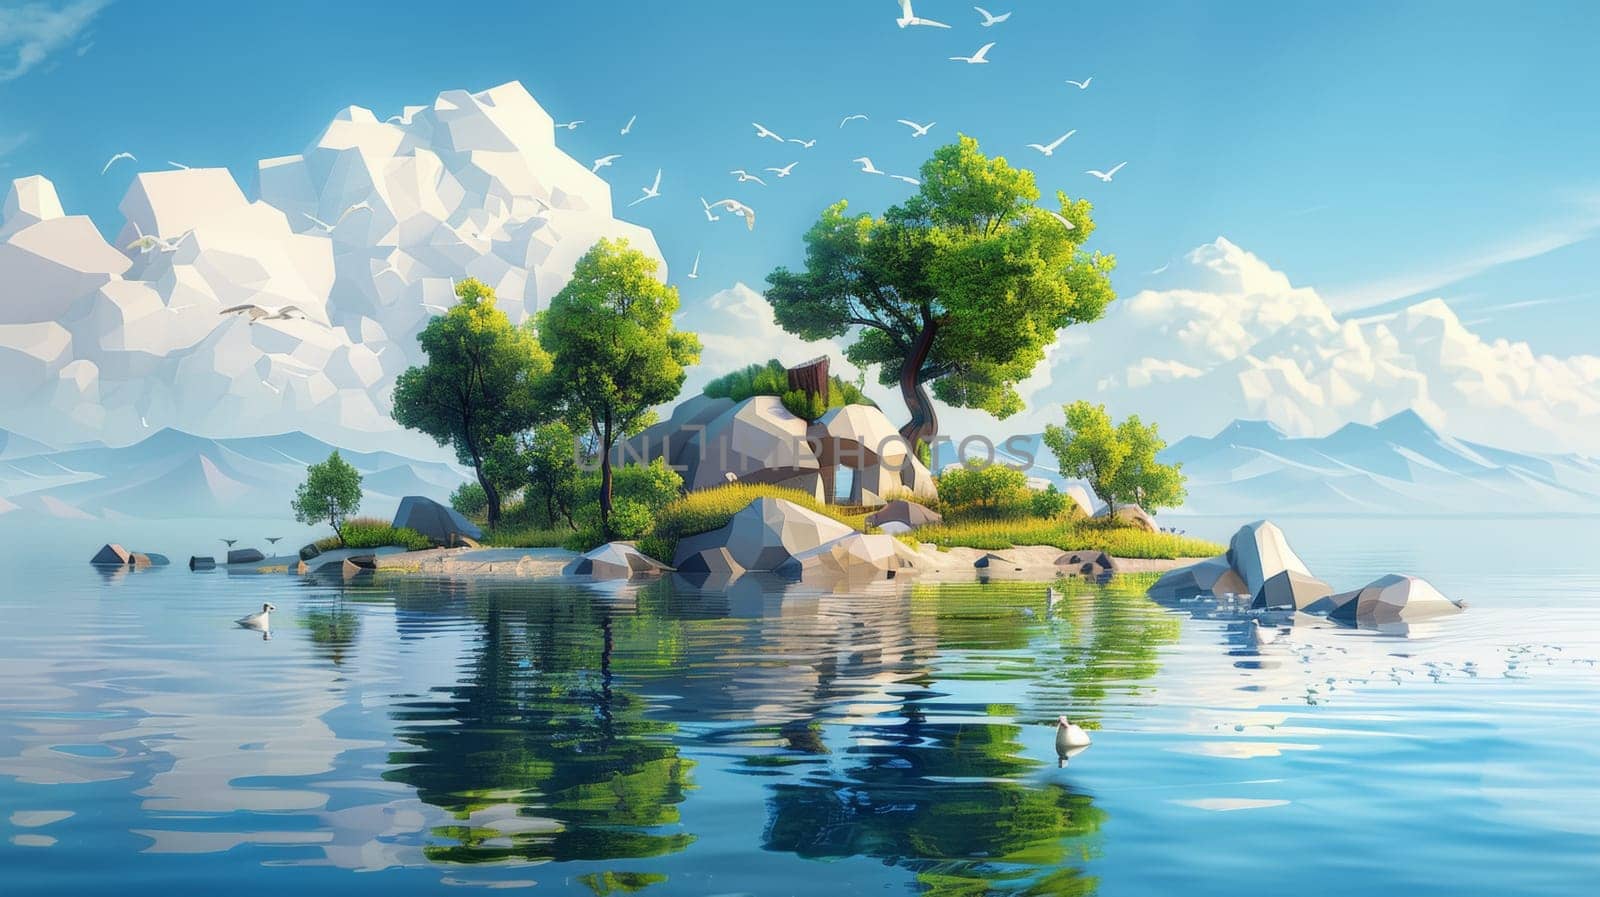 A small island with trees and birds floating in the water